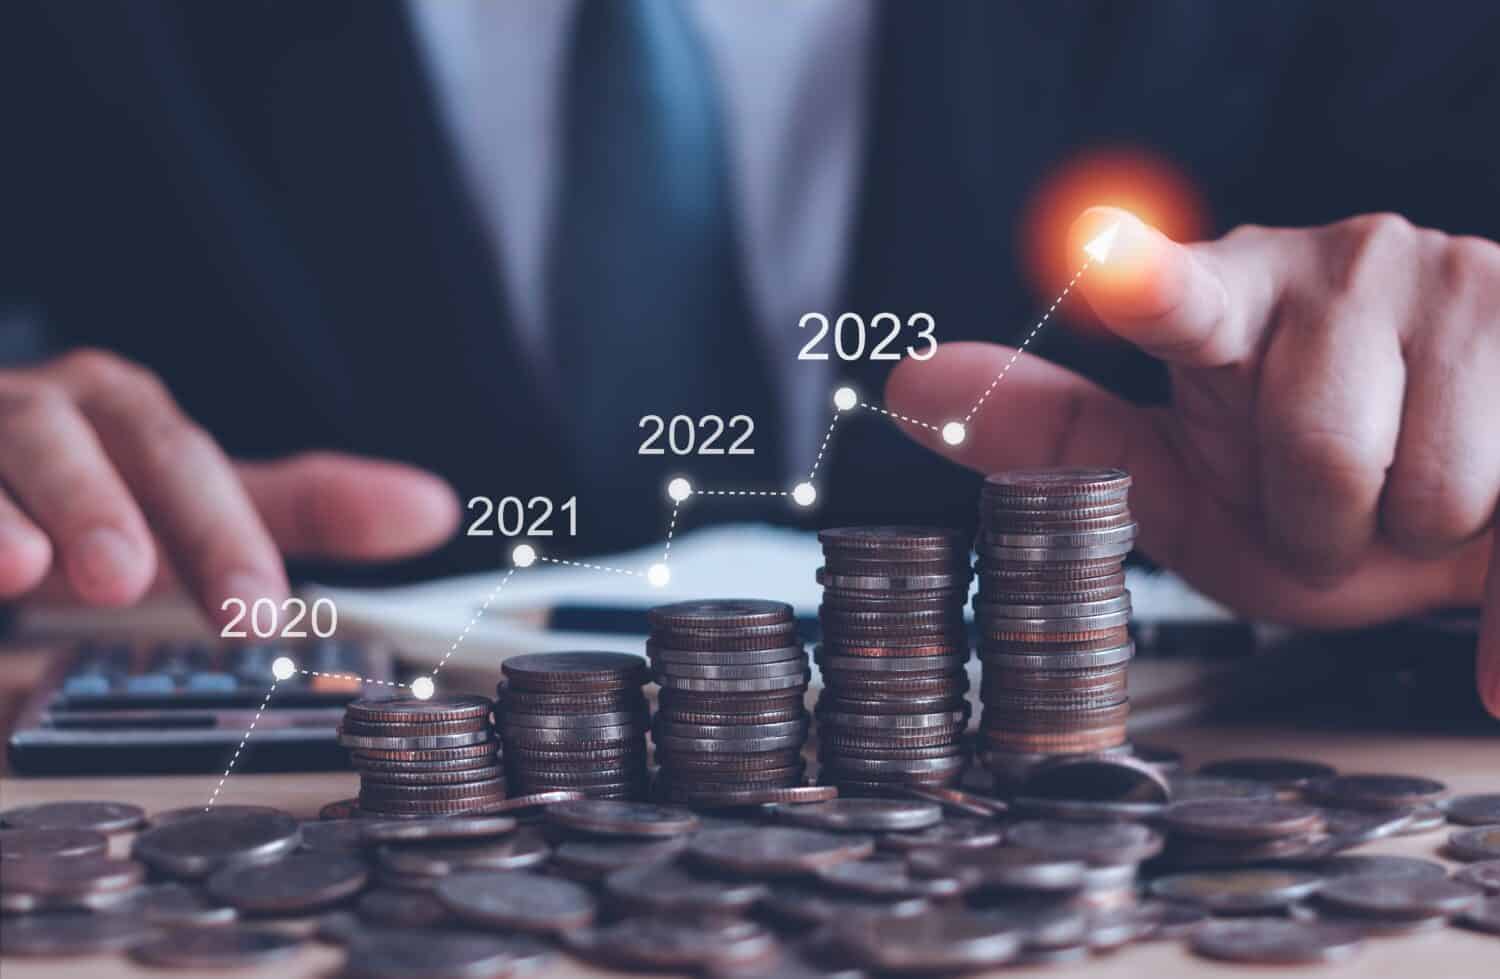 Businessman touch arrow showing financial growth 2023 on stacked coins business background,Concepts savings money and accounting, investments, banks, bonds, dividends, inflation and digital assets.